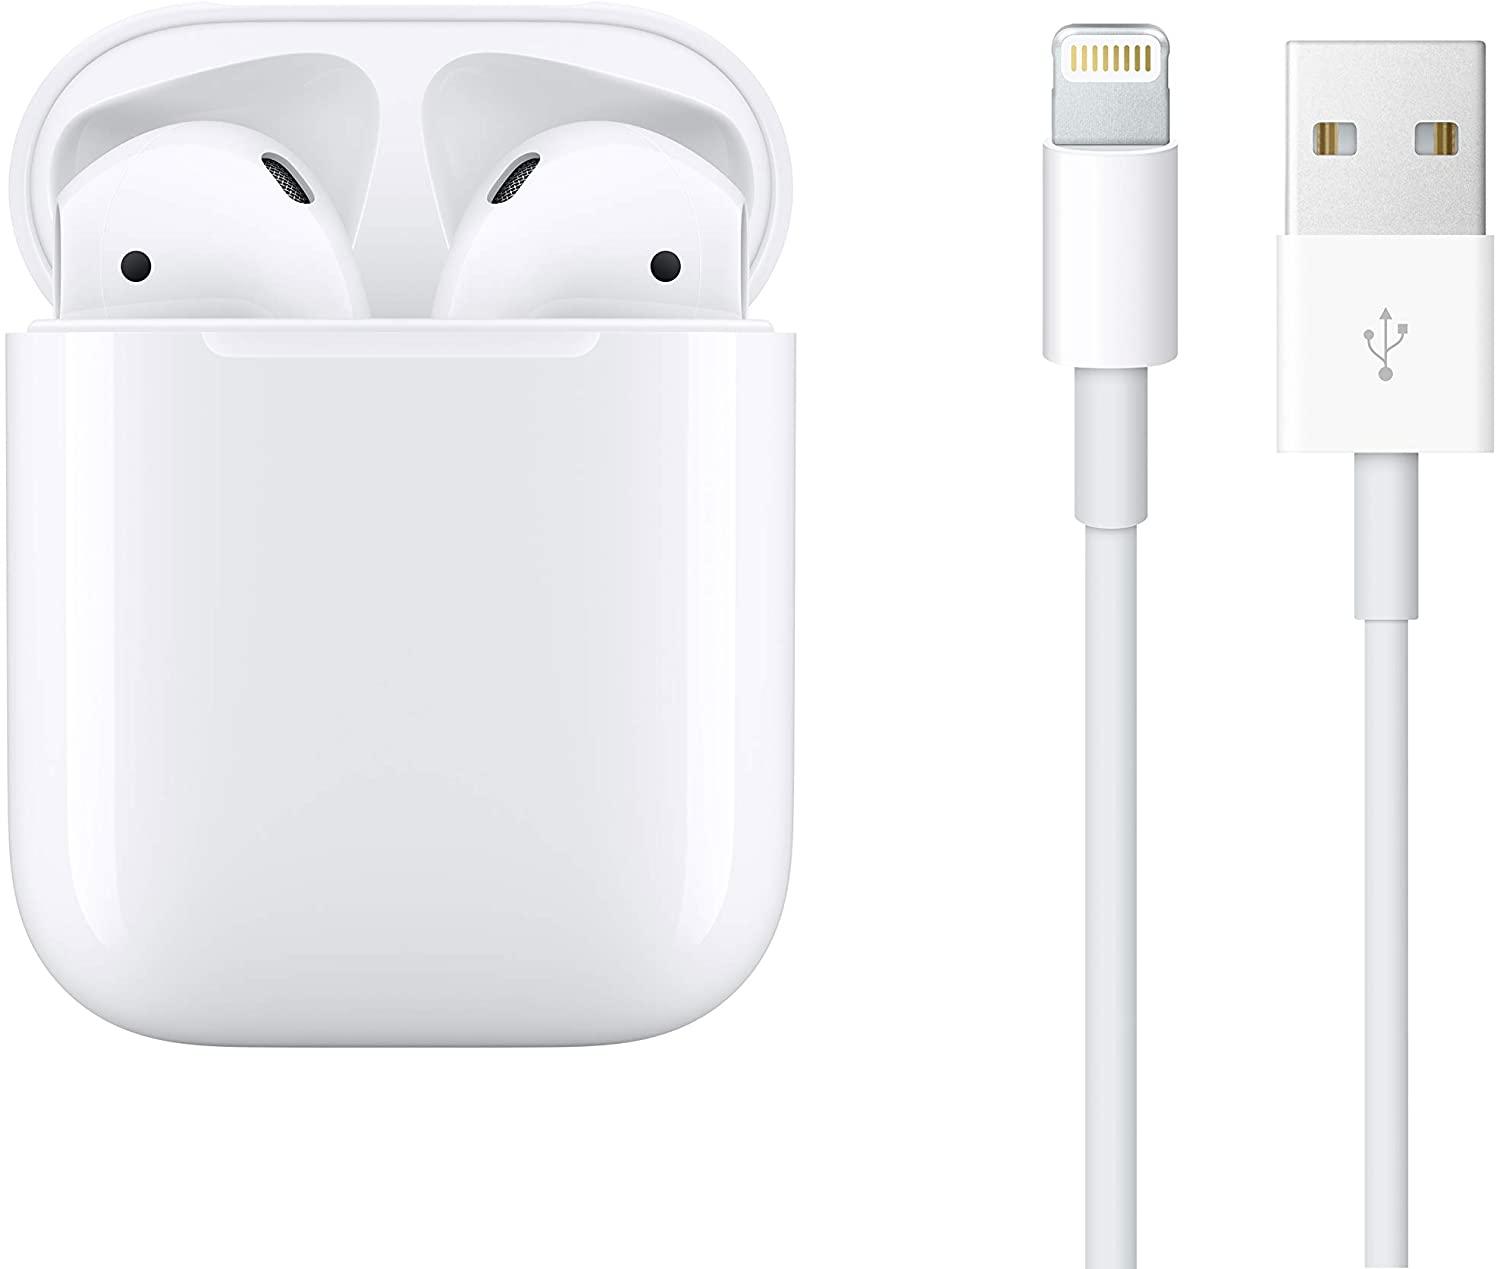 Apple AirPods 2nd Gen with Charging Case for $99 Shipped